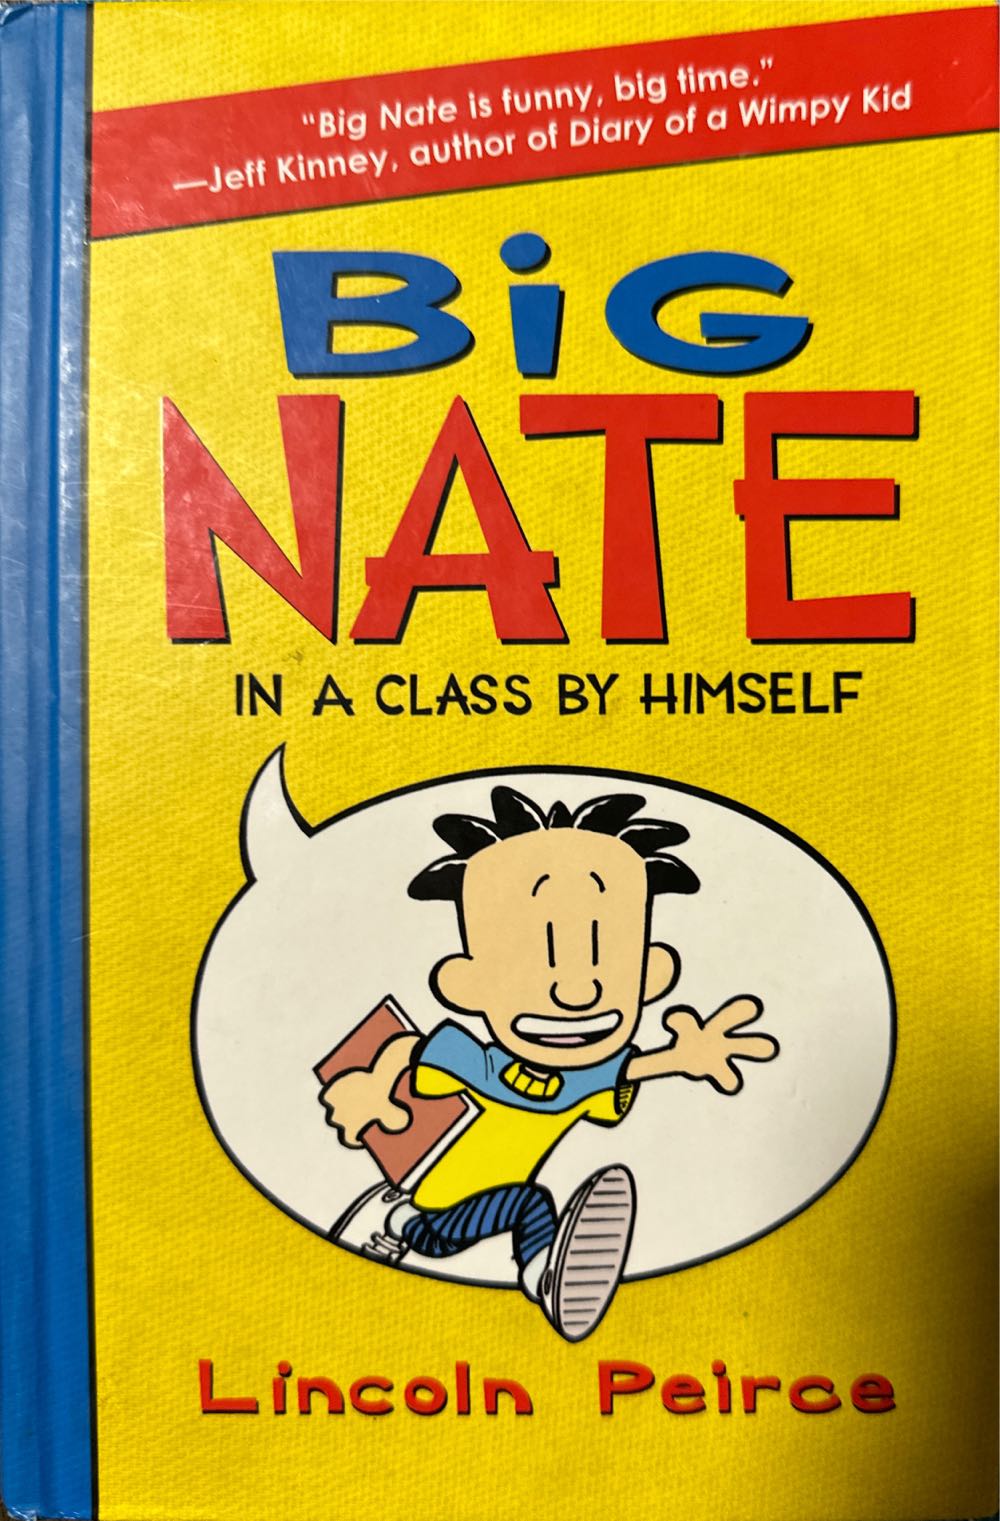 Big Nate #1: In A Class By Himself - Lincoln Peirce (Harper - Hardcover) book collectible [Barcode 9780061944345] - Main Image 2